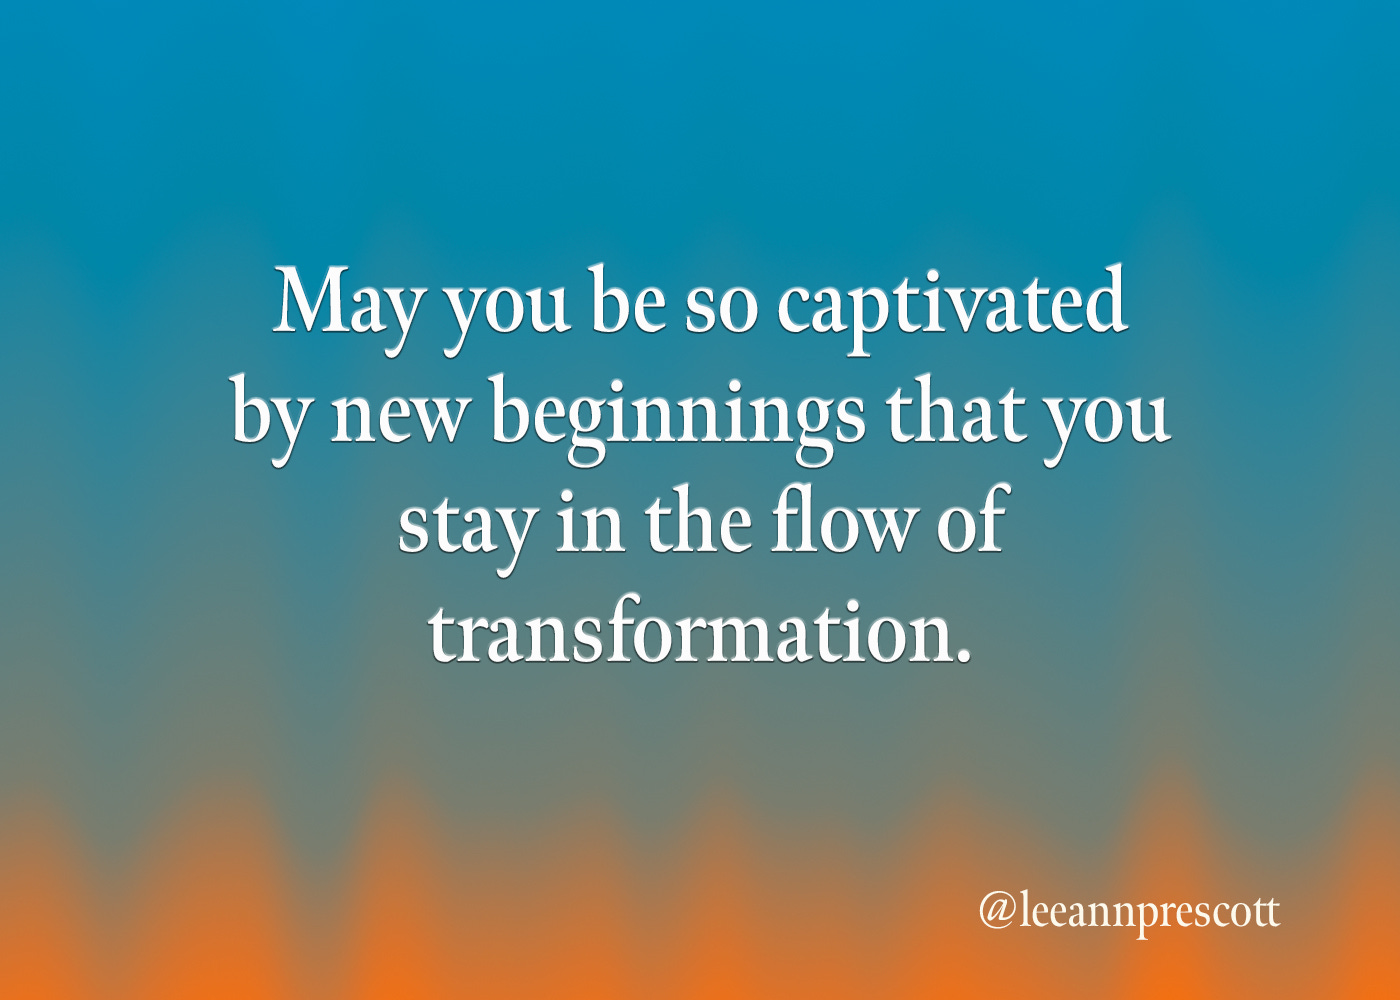 May you be so captivated by new beginnings that you stay in the flow of transformation